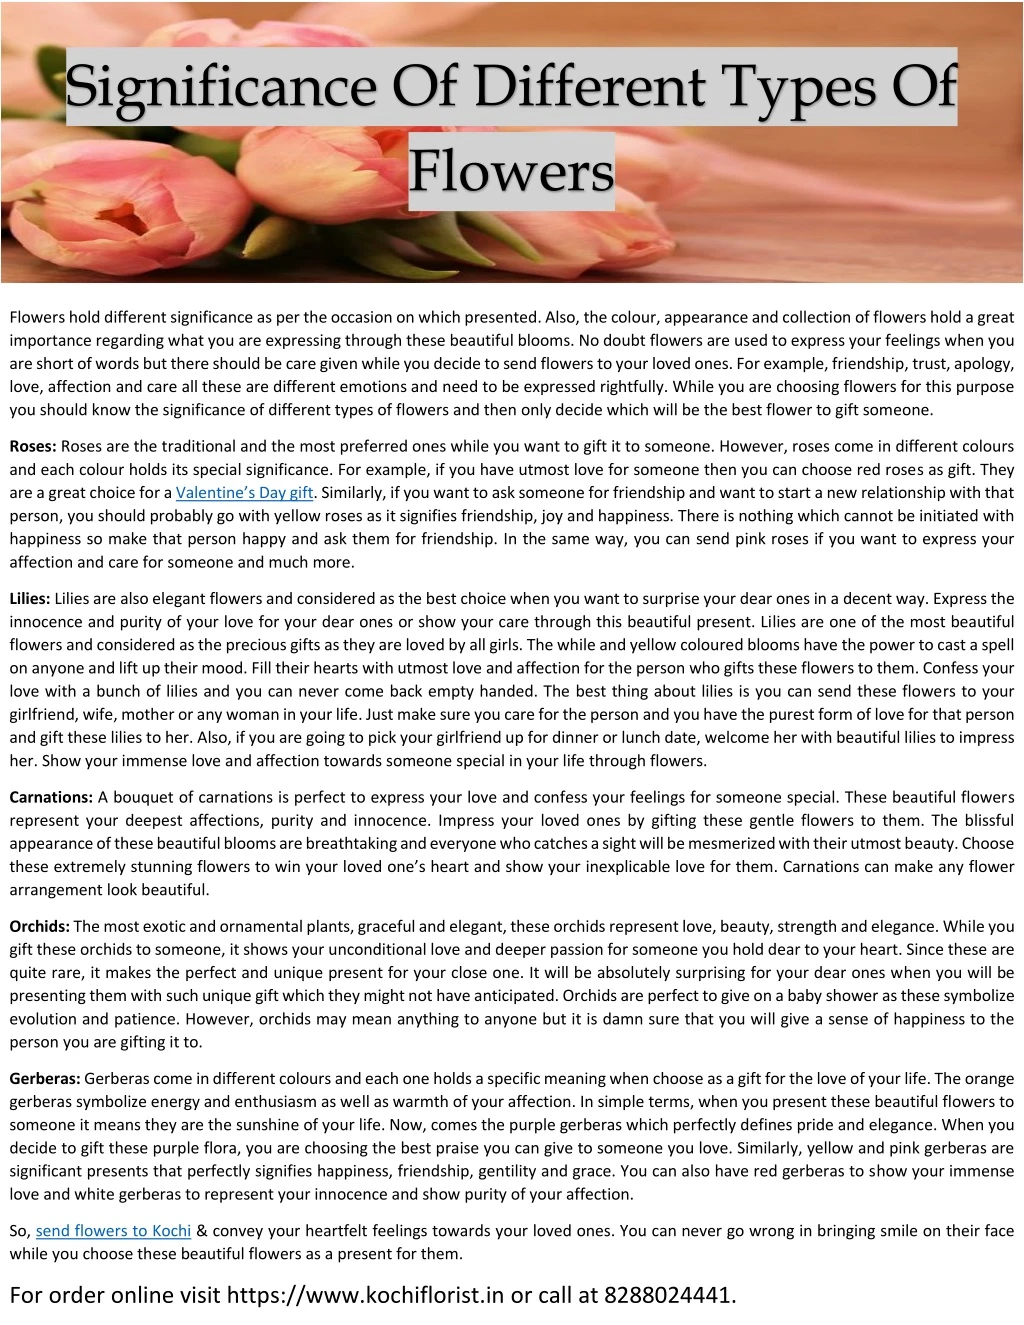 significance of different types of flowers